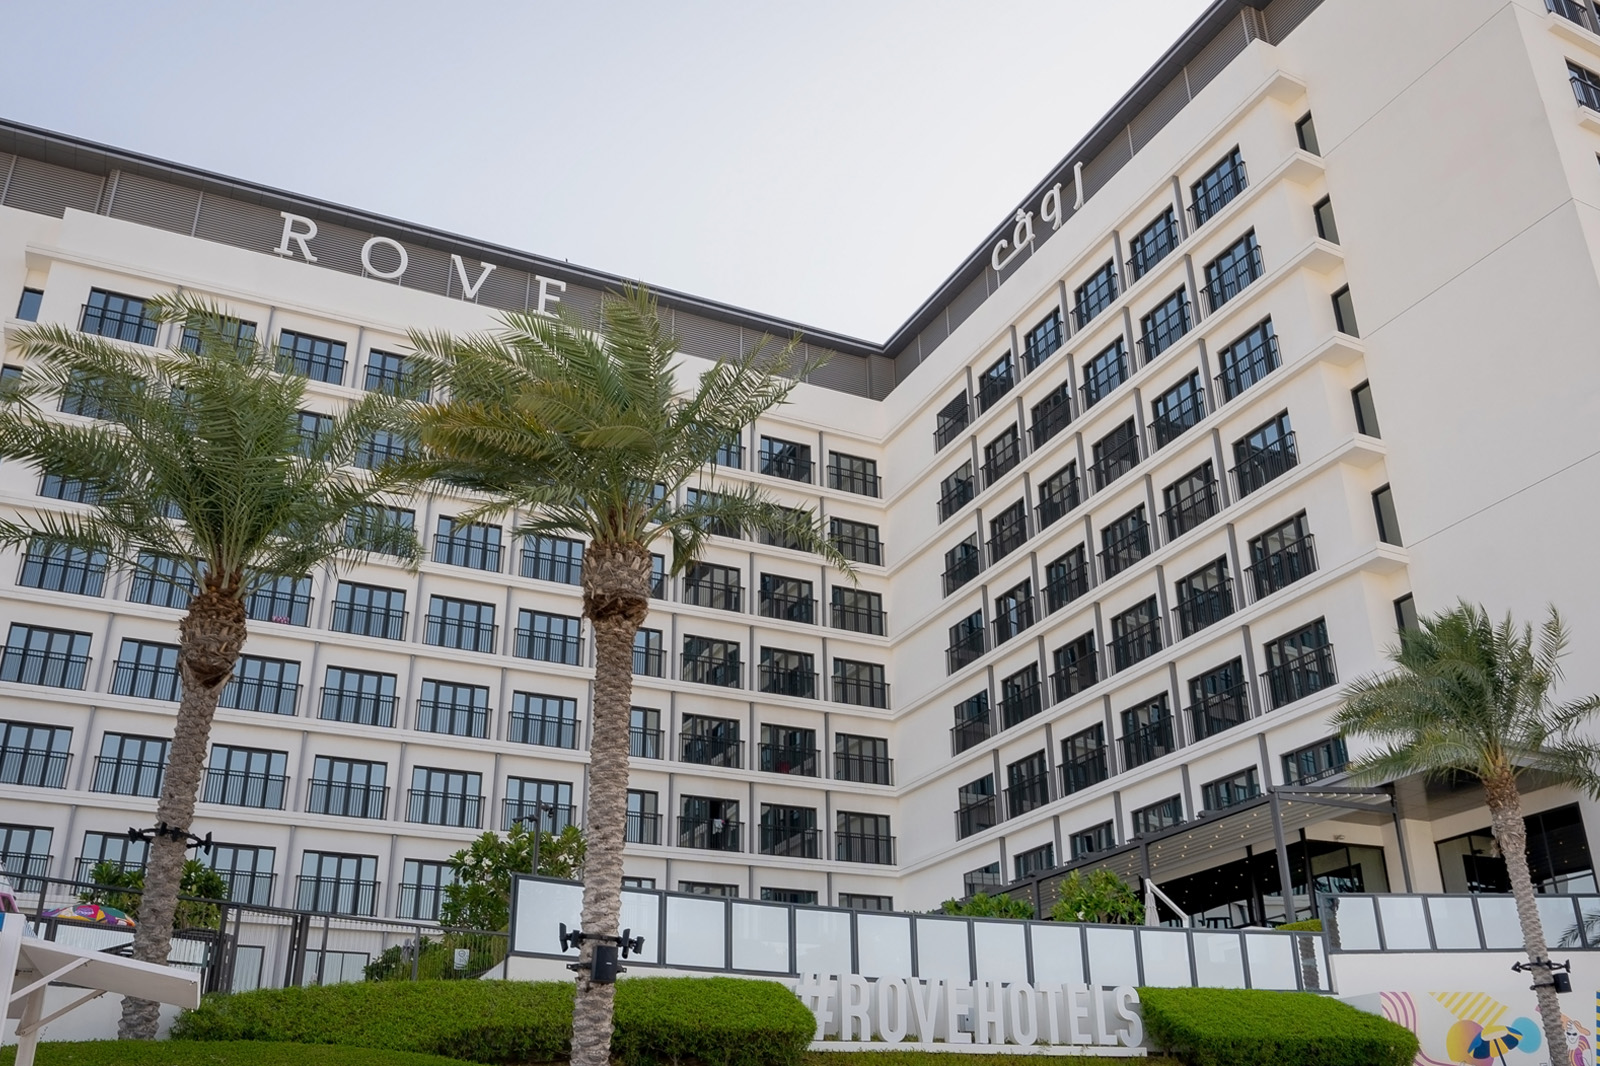 Rove Hotels Design: Redefining Outdoor Spaces